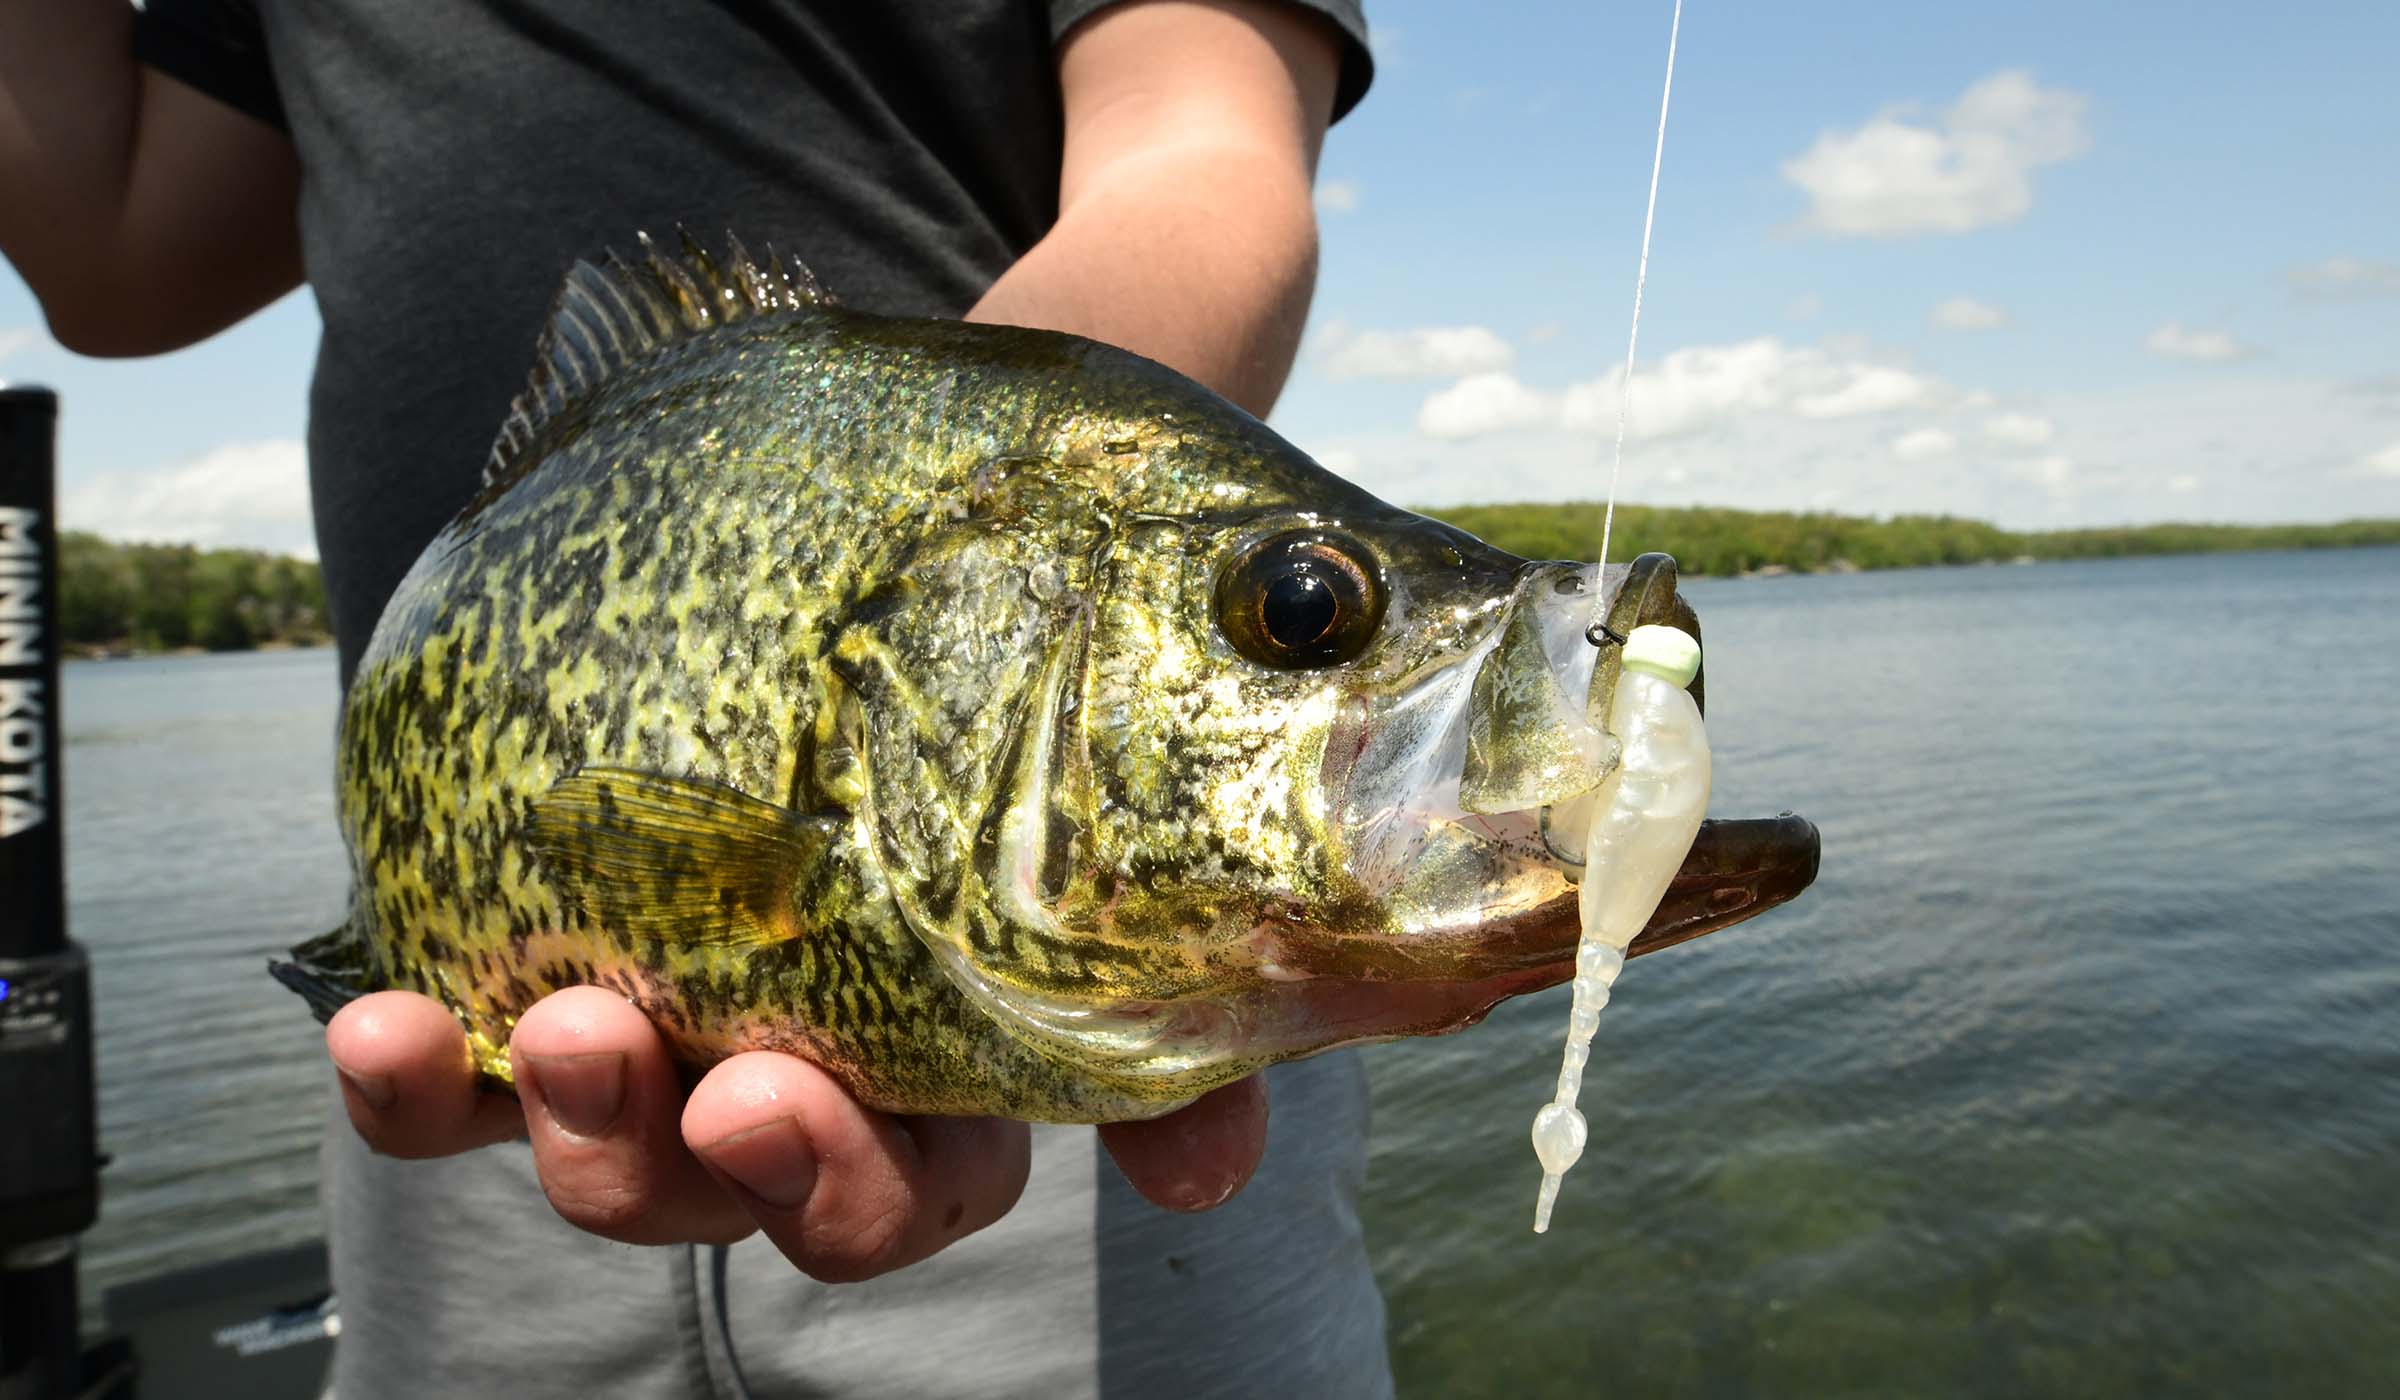 The Best Fishing Lines for Crappie: Braid, Mono, Copolymer, and Fluorocarbon